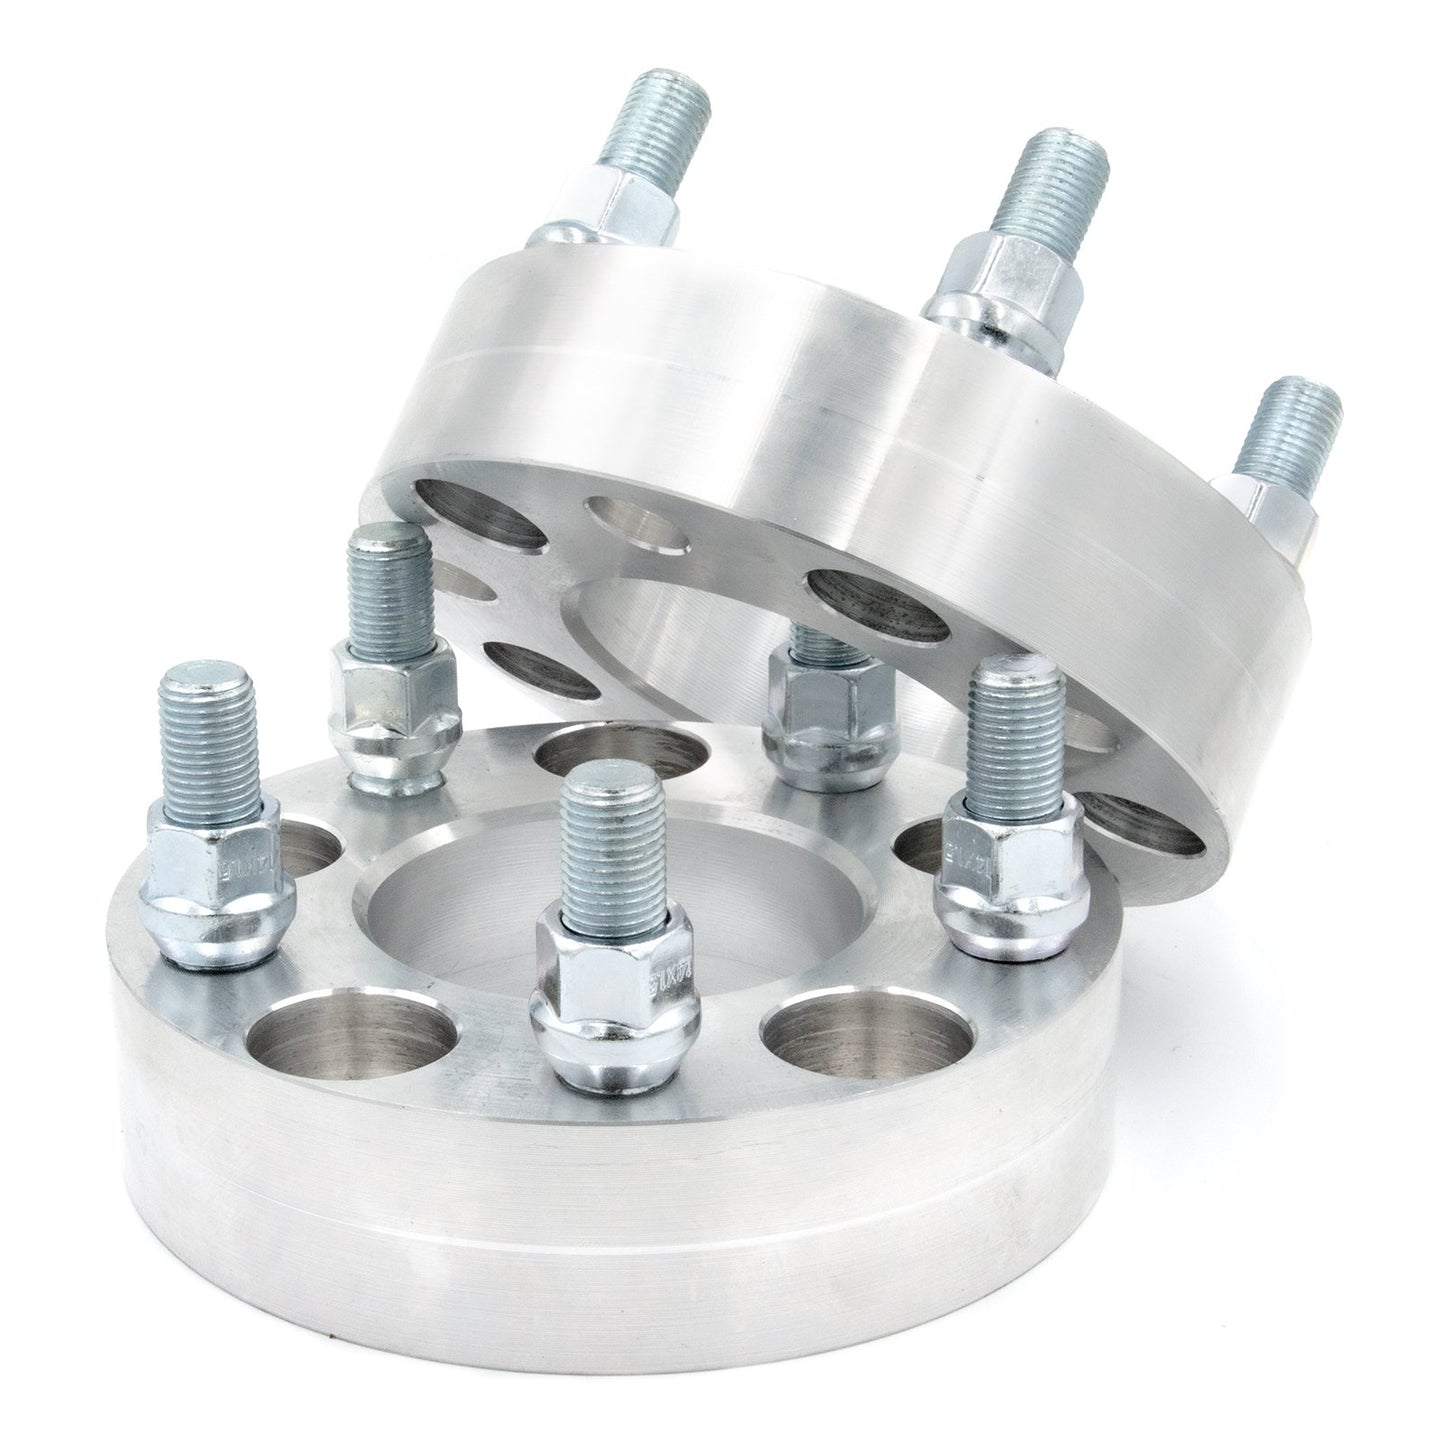 5x4.5" to 5x120 Wheel Spacer/Adapter - Thickness: 3/4"- 4"